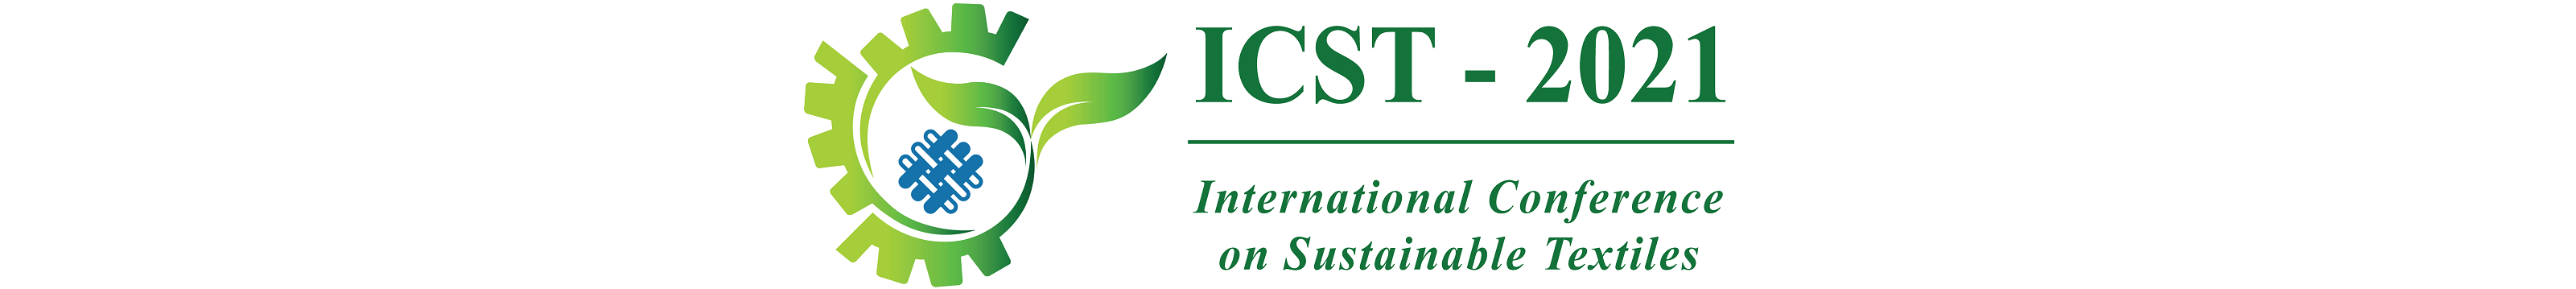 International Conference on Sustainable Textile 2021